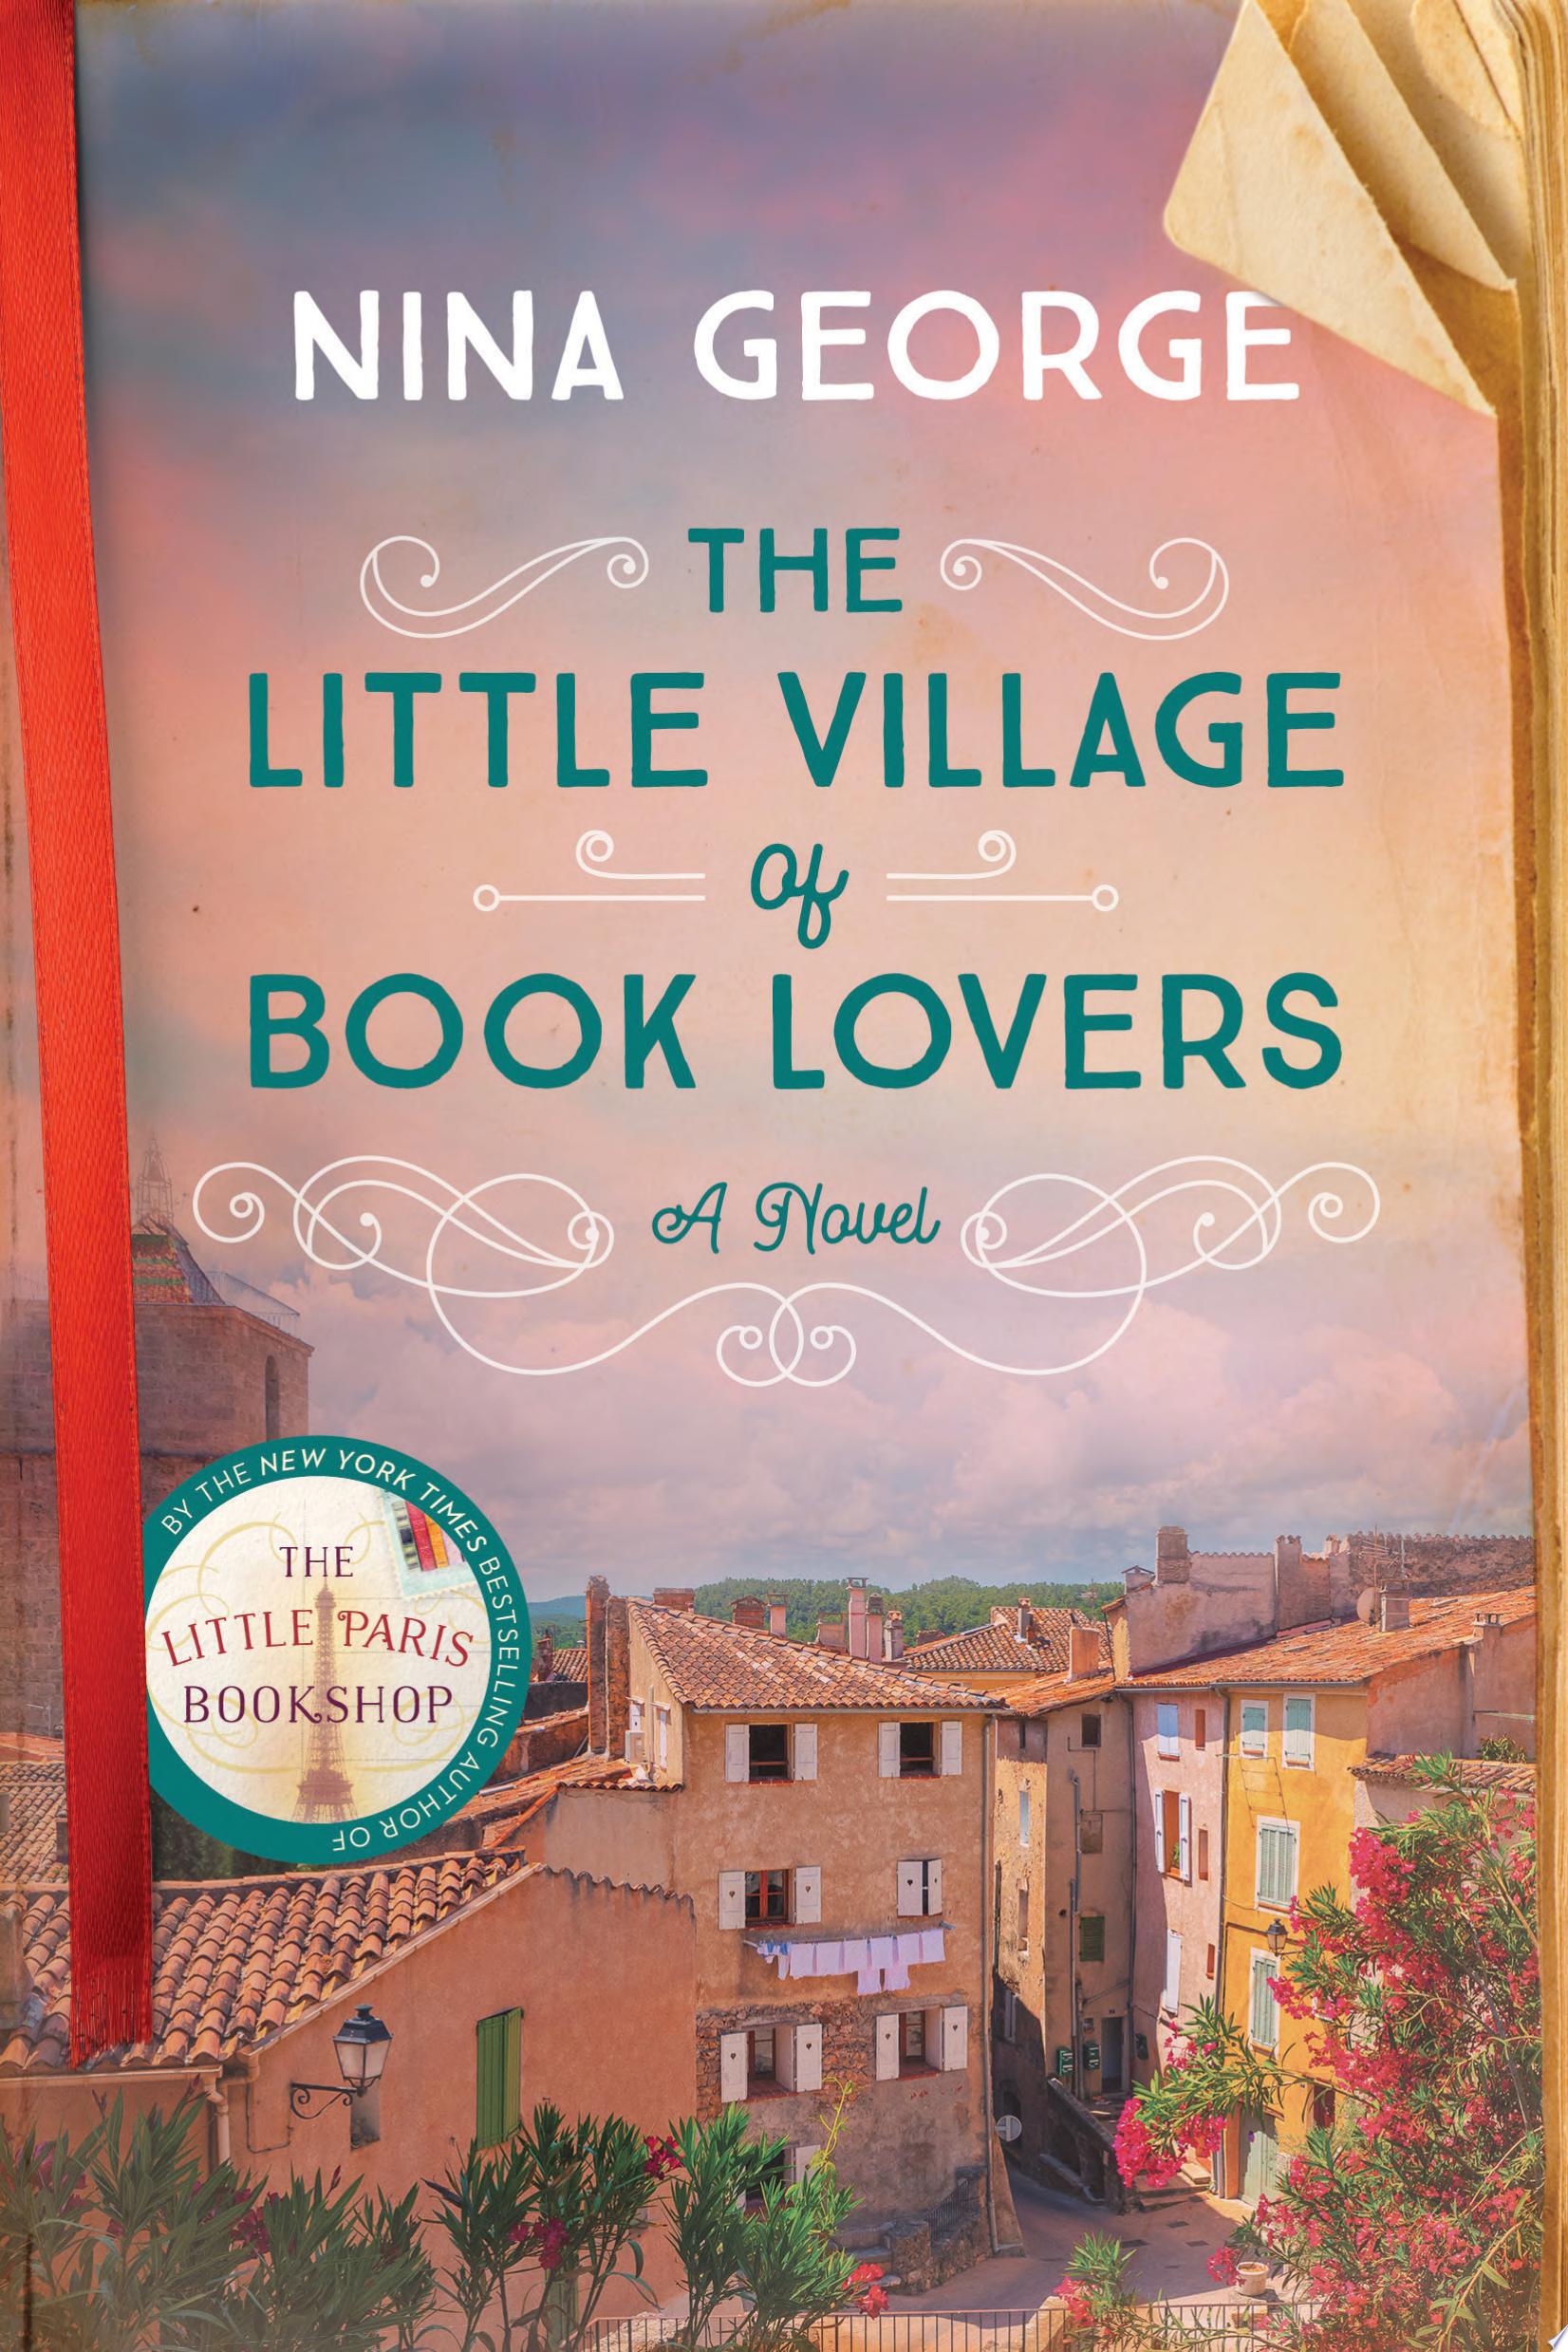 Image for "The Little Village of Book Lovers"